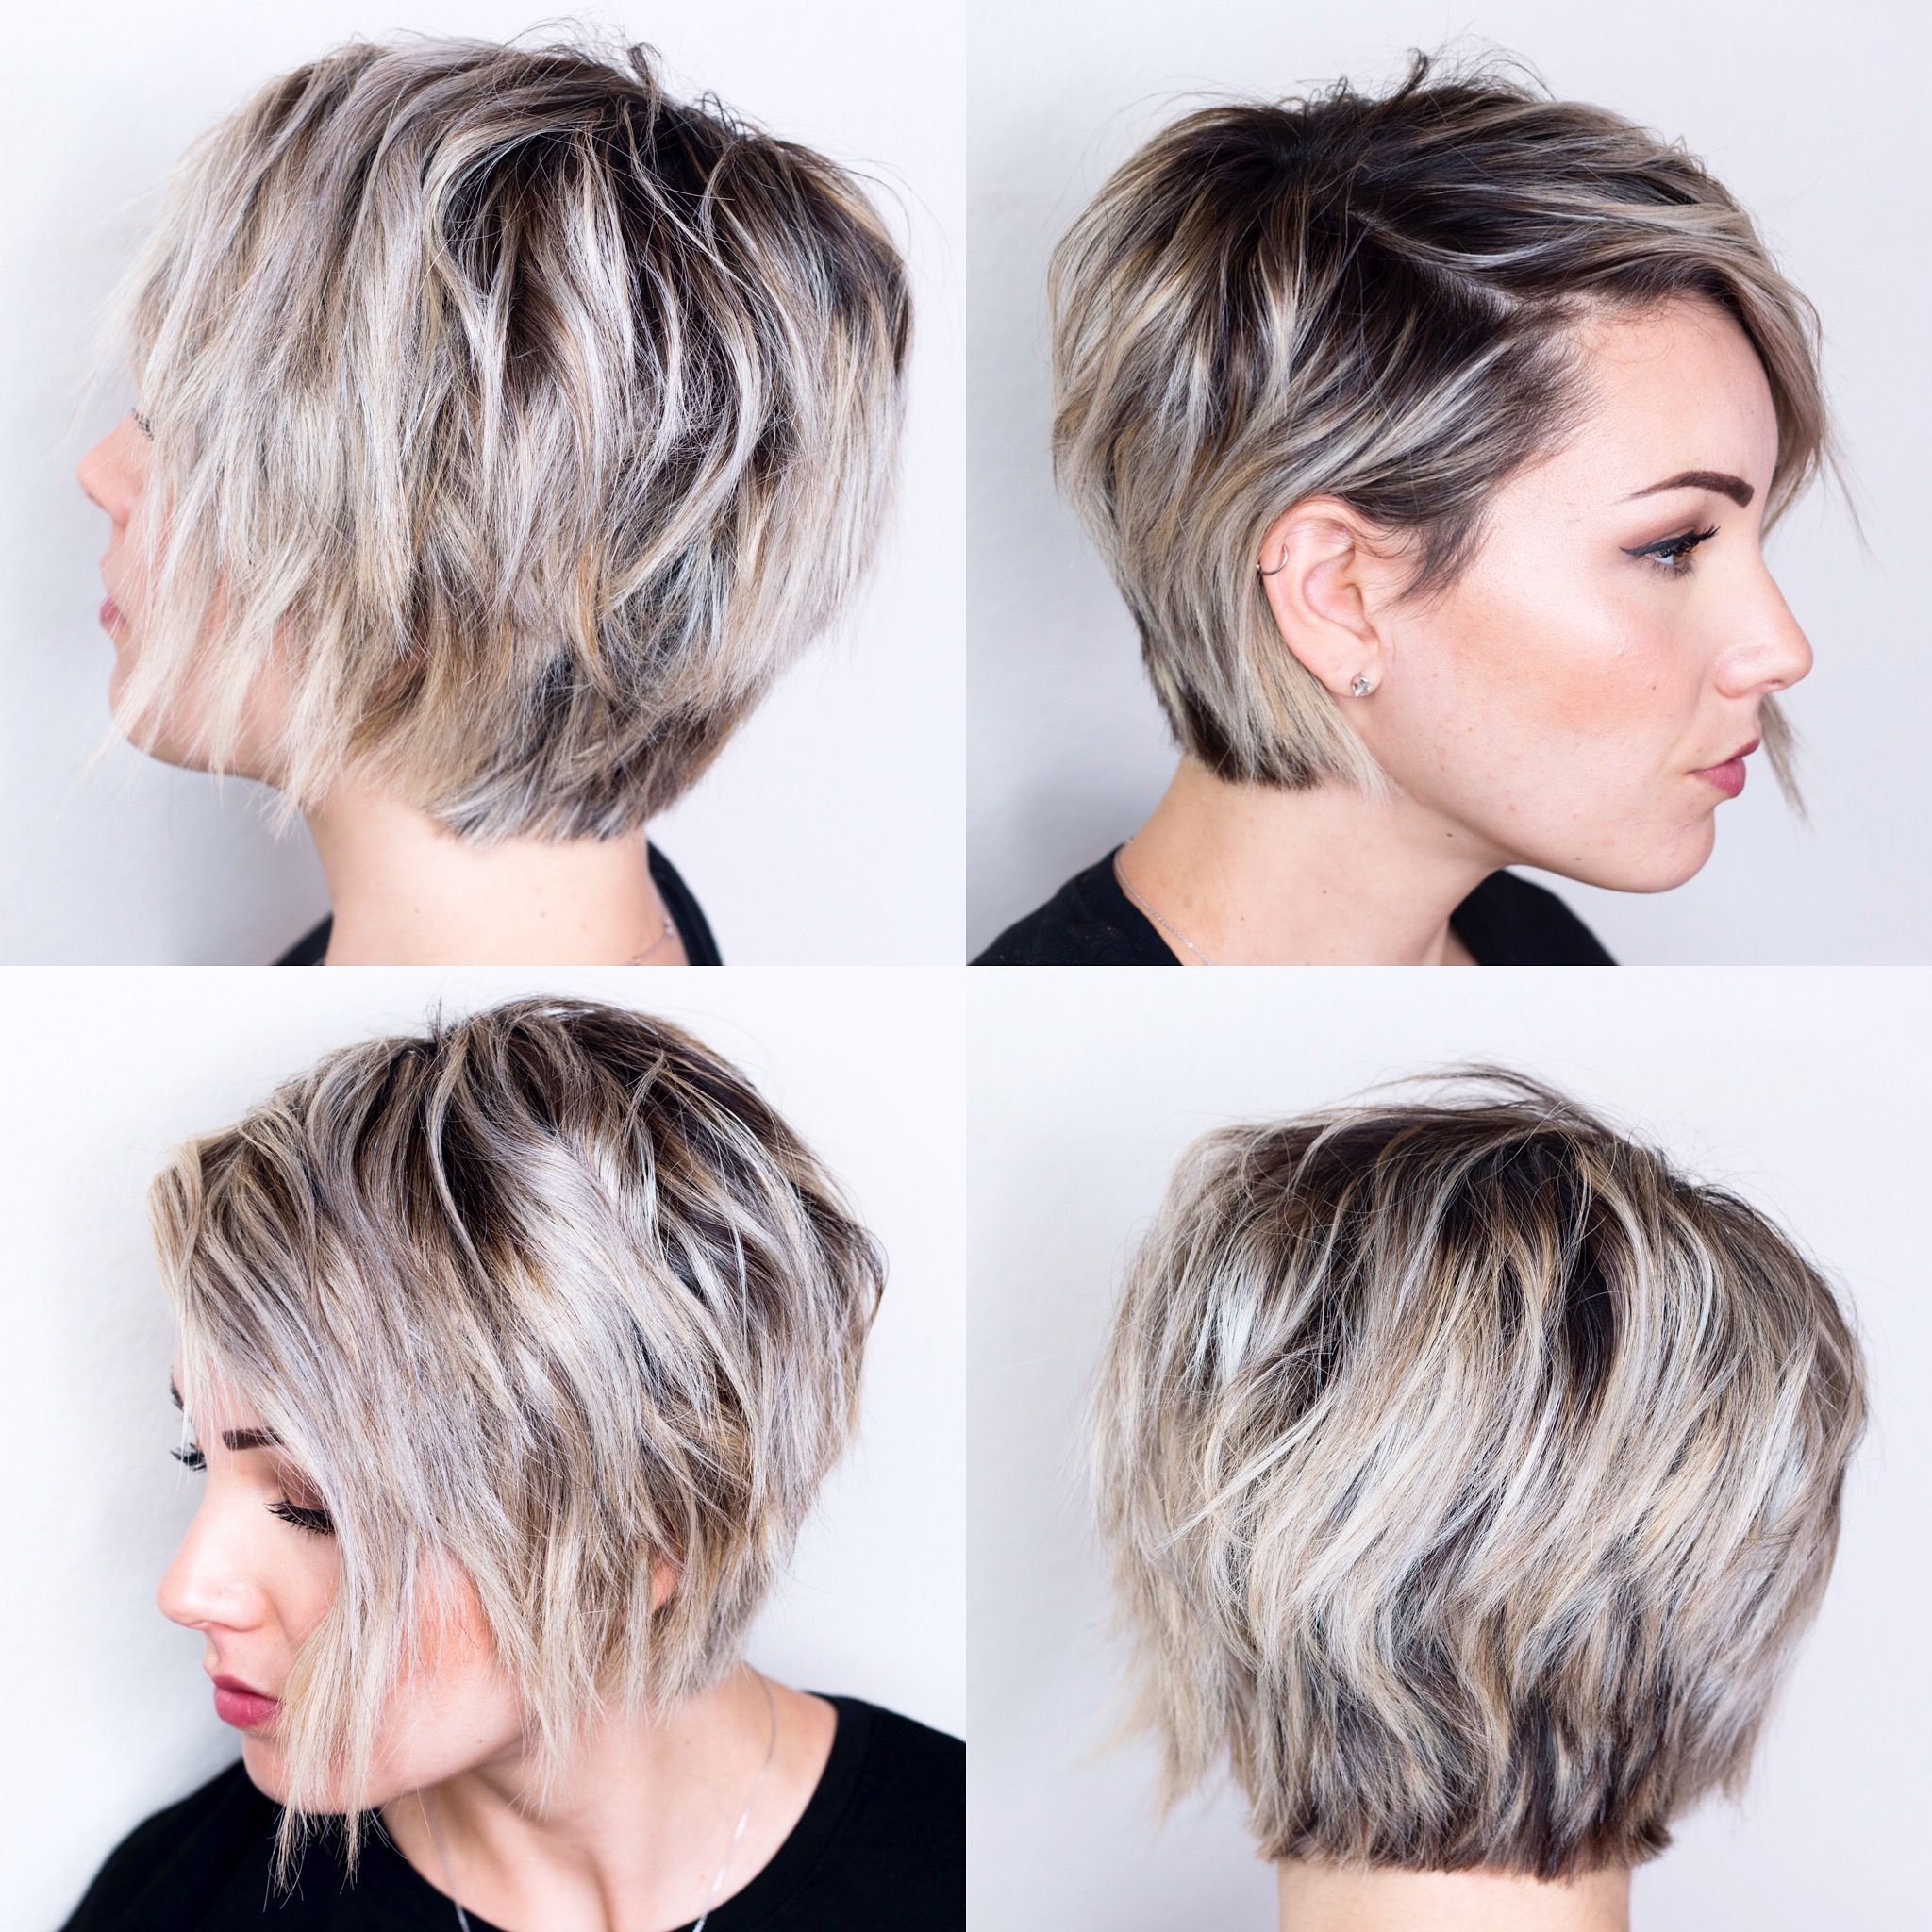 360 View Of Short Hair | H A I R In 2018 | Pinterest | Short Hair For Short Hairstyles For Women With Oval Face (View 2 of 25)